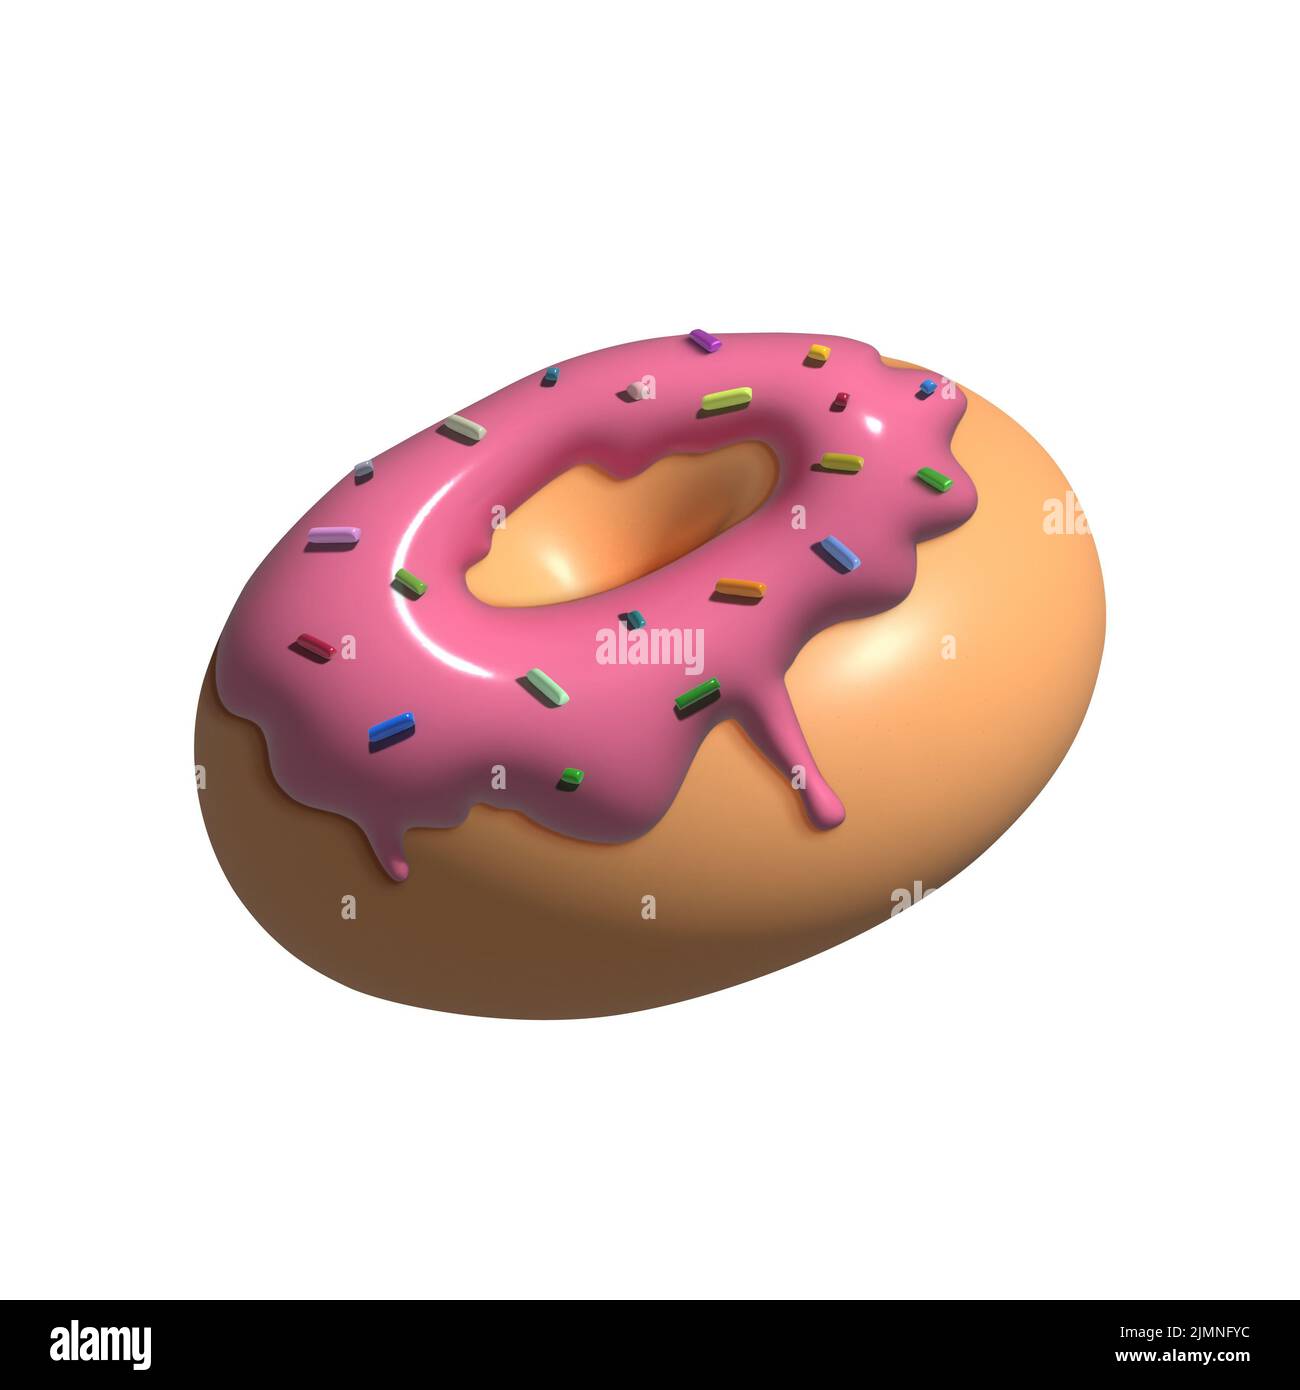 Donuts with pink icing and sprinkles. 3d realistic illustration isolated on white background. Stock Photo